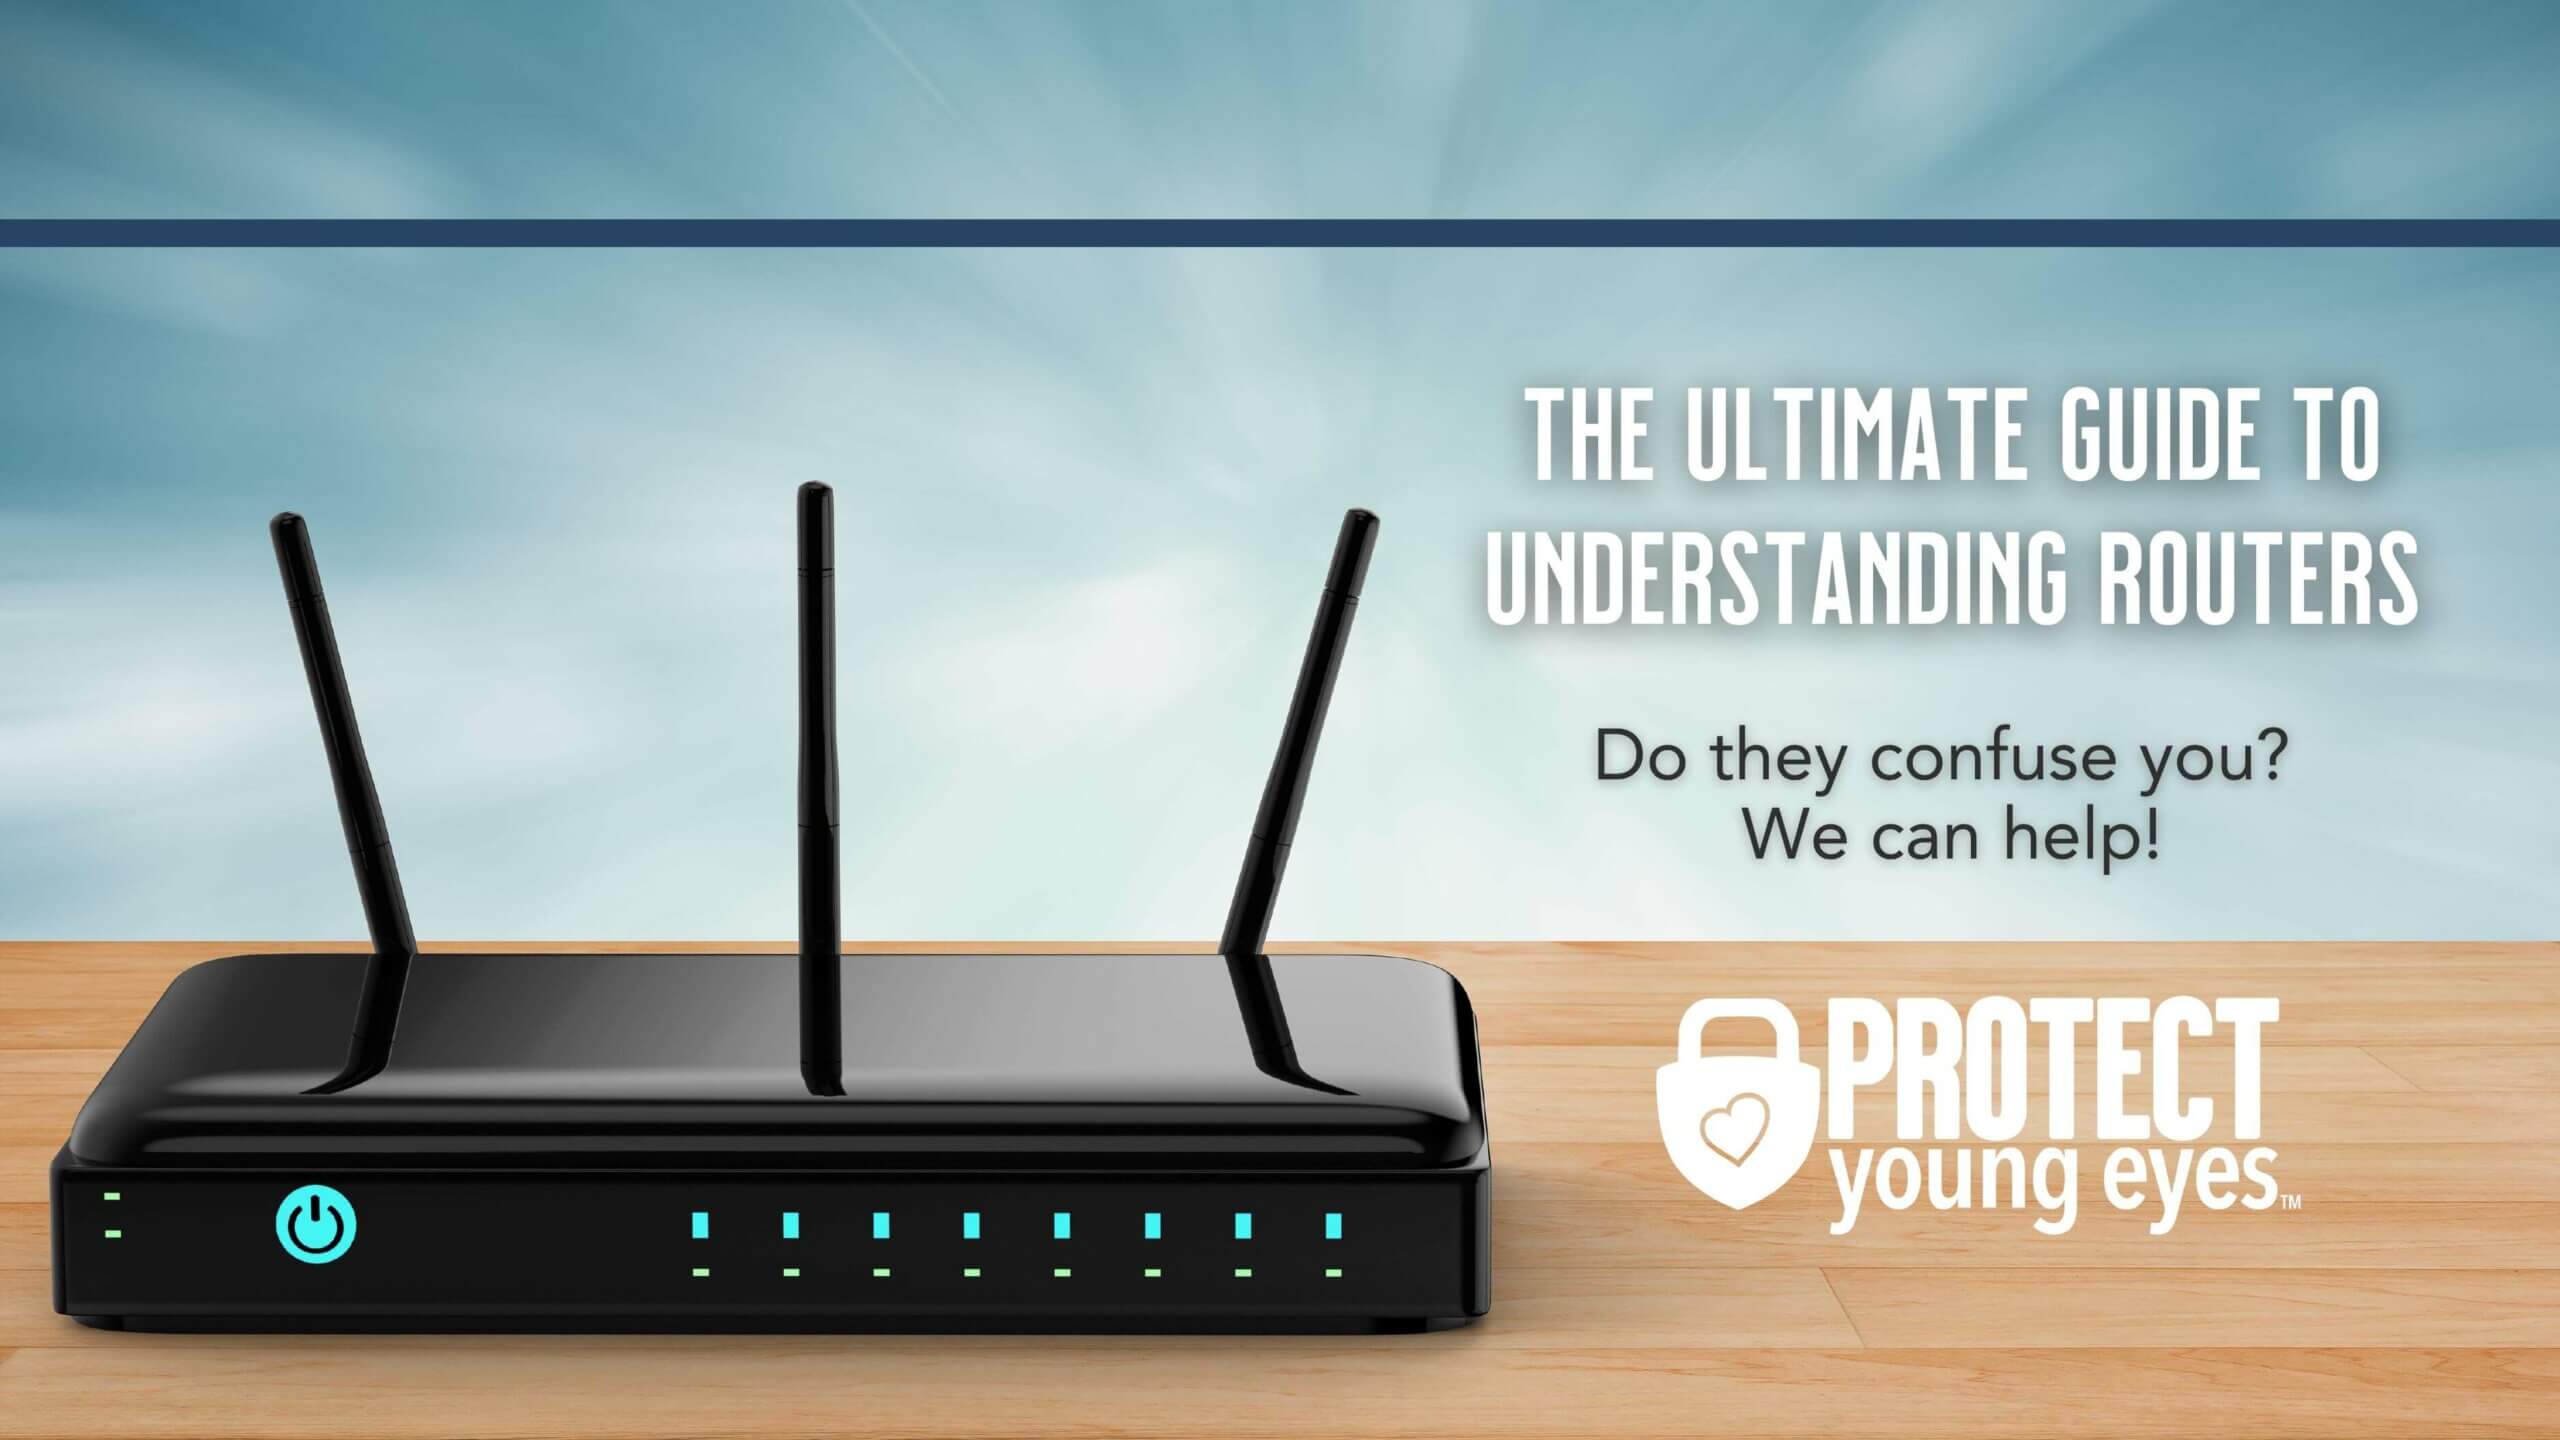 Retfærdighed Skab vil beslutte The Ultimate Guide to Understanding Routers | Protect Young Eyes